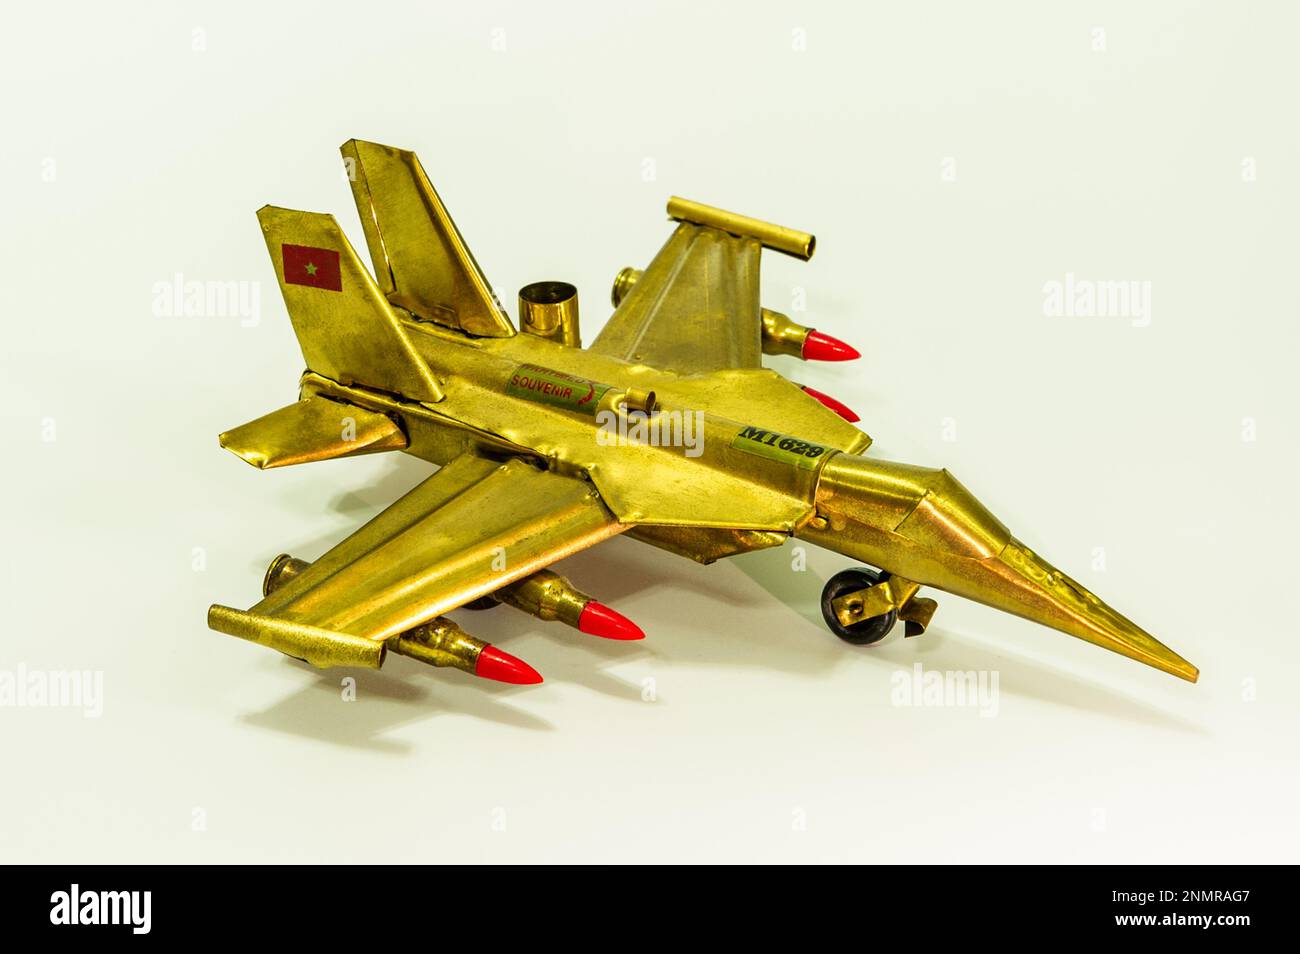 A Sukhoi SU-30 Flanker model plane made from old brass shell and bullet cases, a wartime souvenir from Vietnam Stock Photo